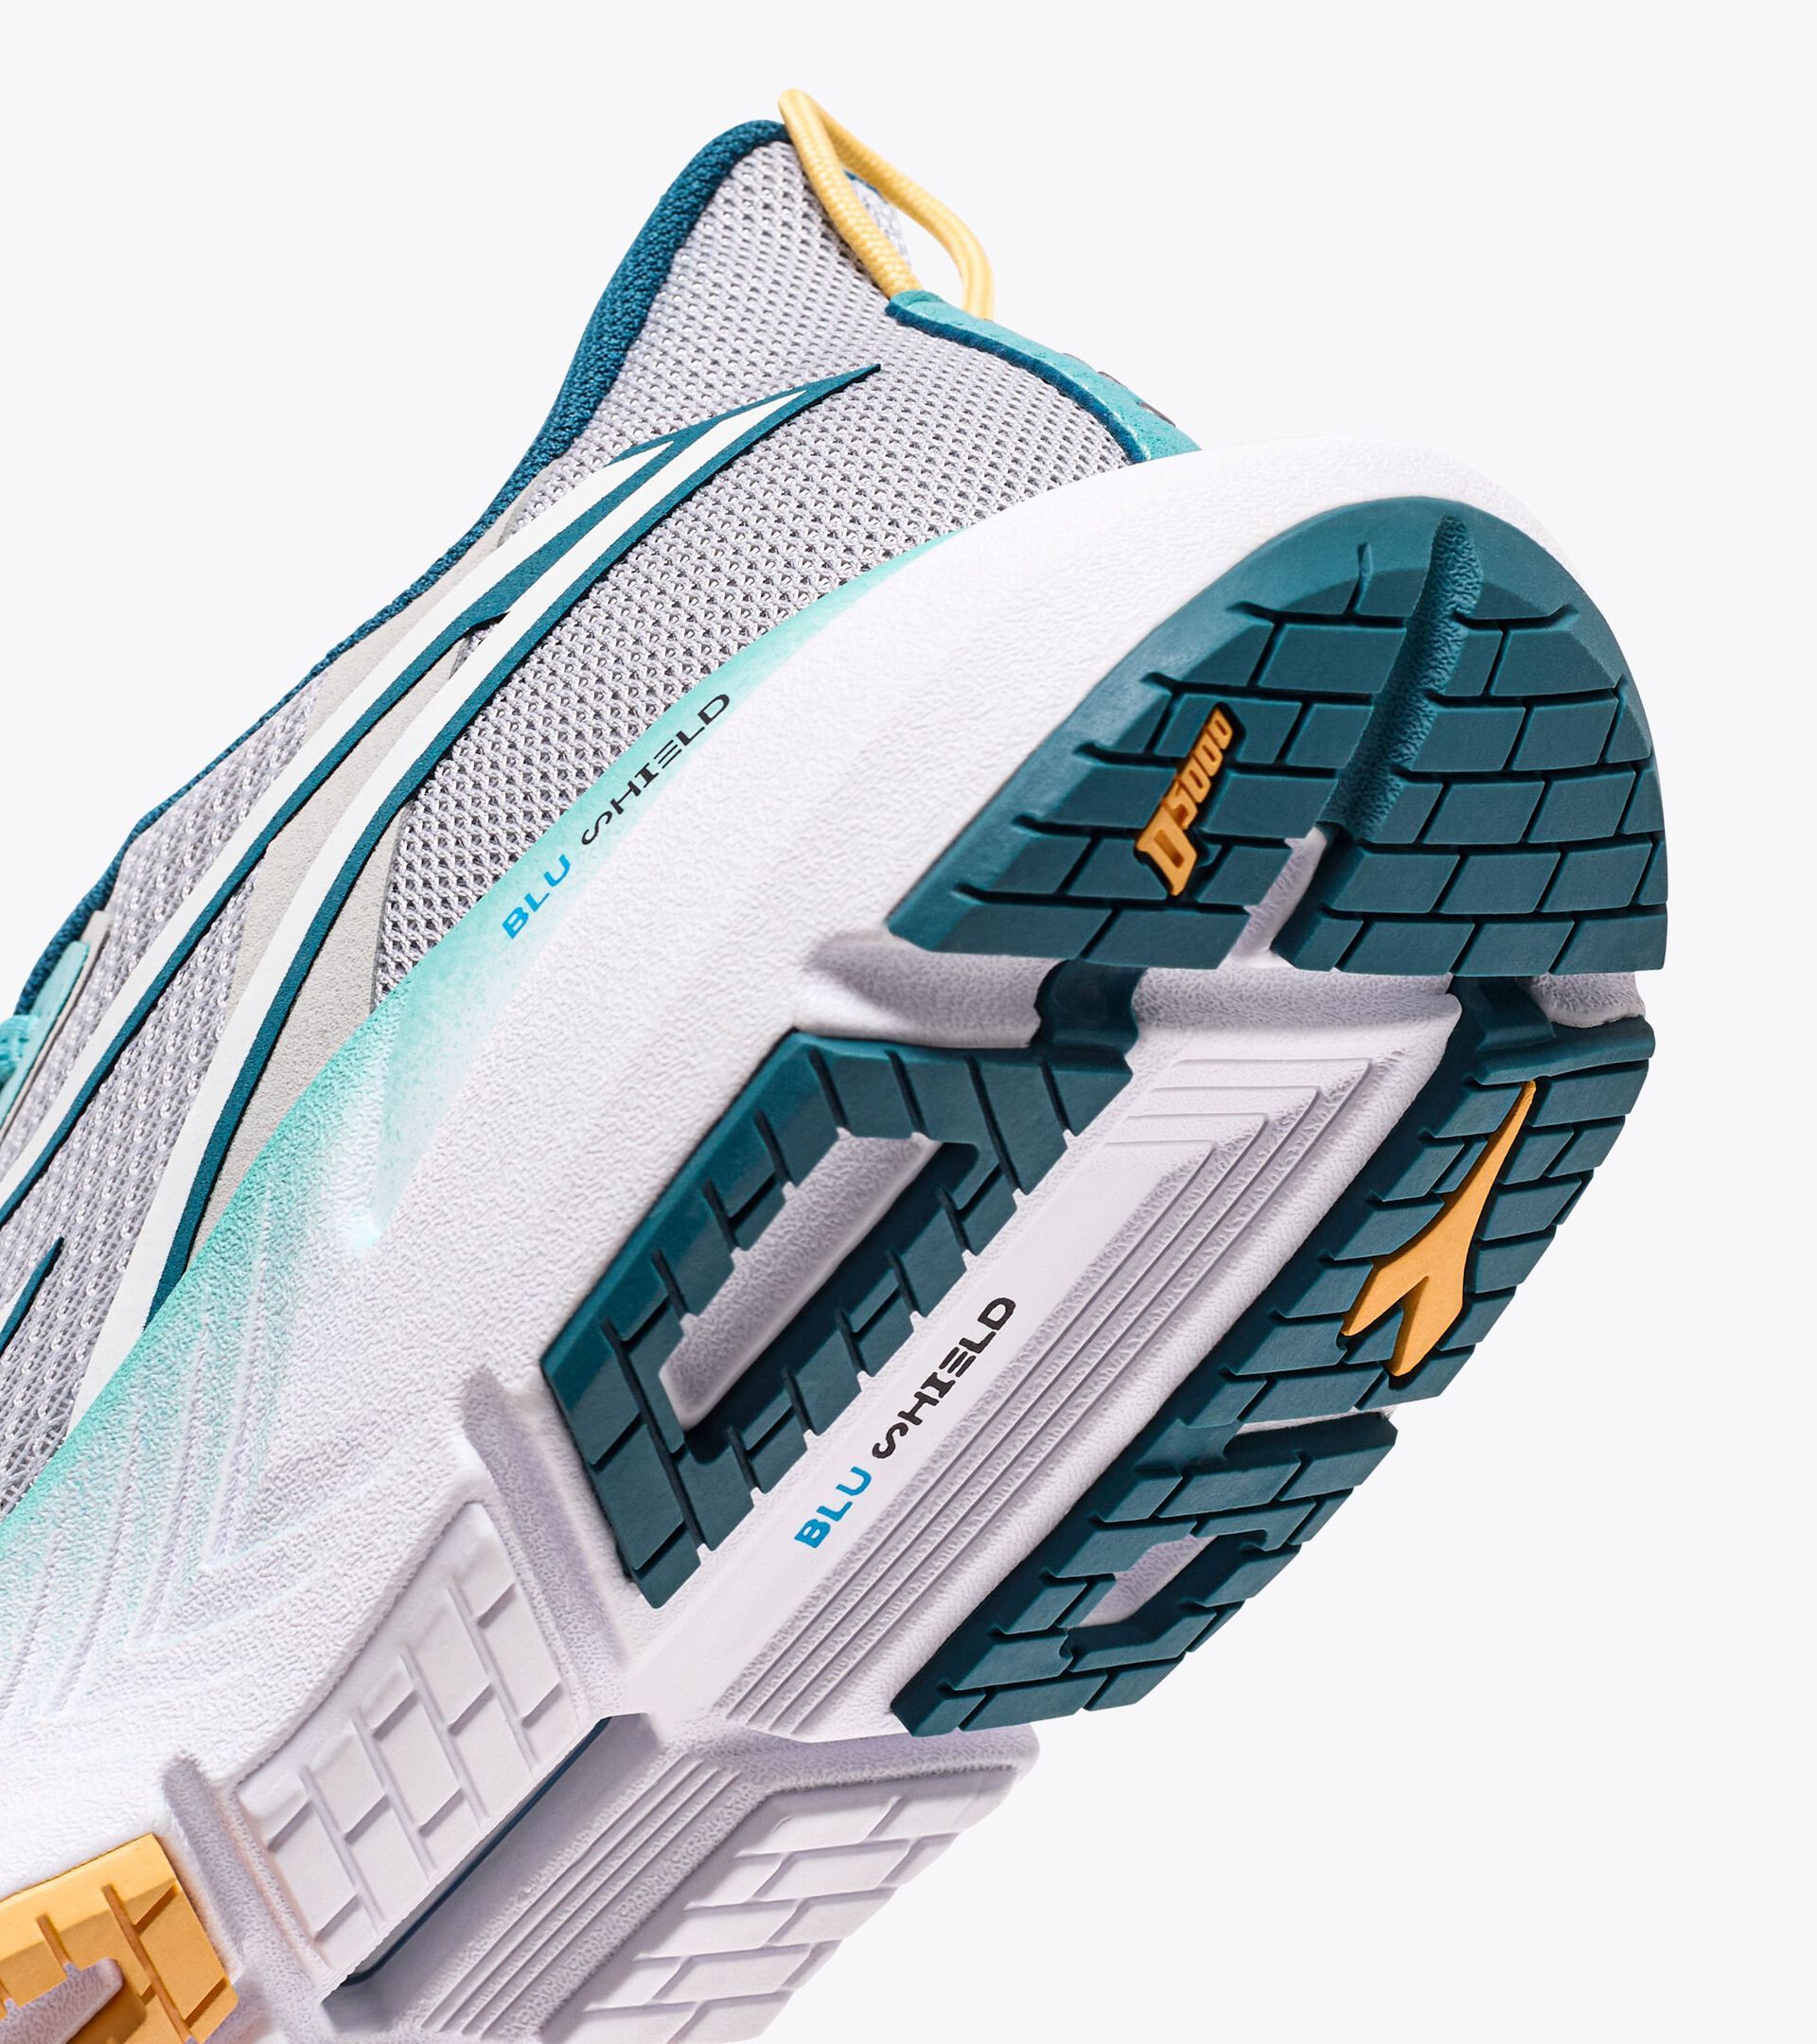 Running shoe - Stability and lightness - Donna MYTHOS BLUSHIELD VOLO 4 W SILVER DD/DUSTY TURQUOISE - Diadora